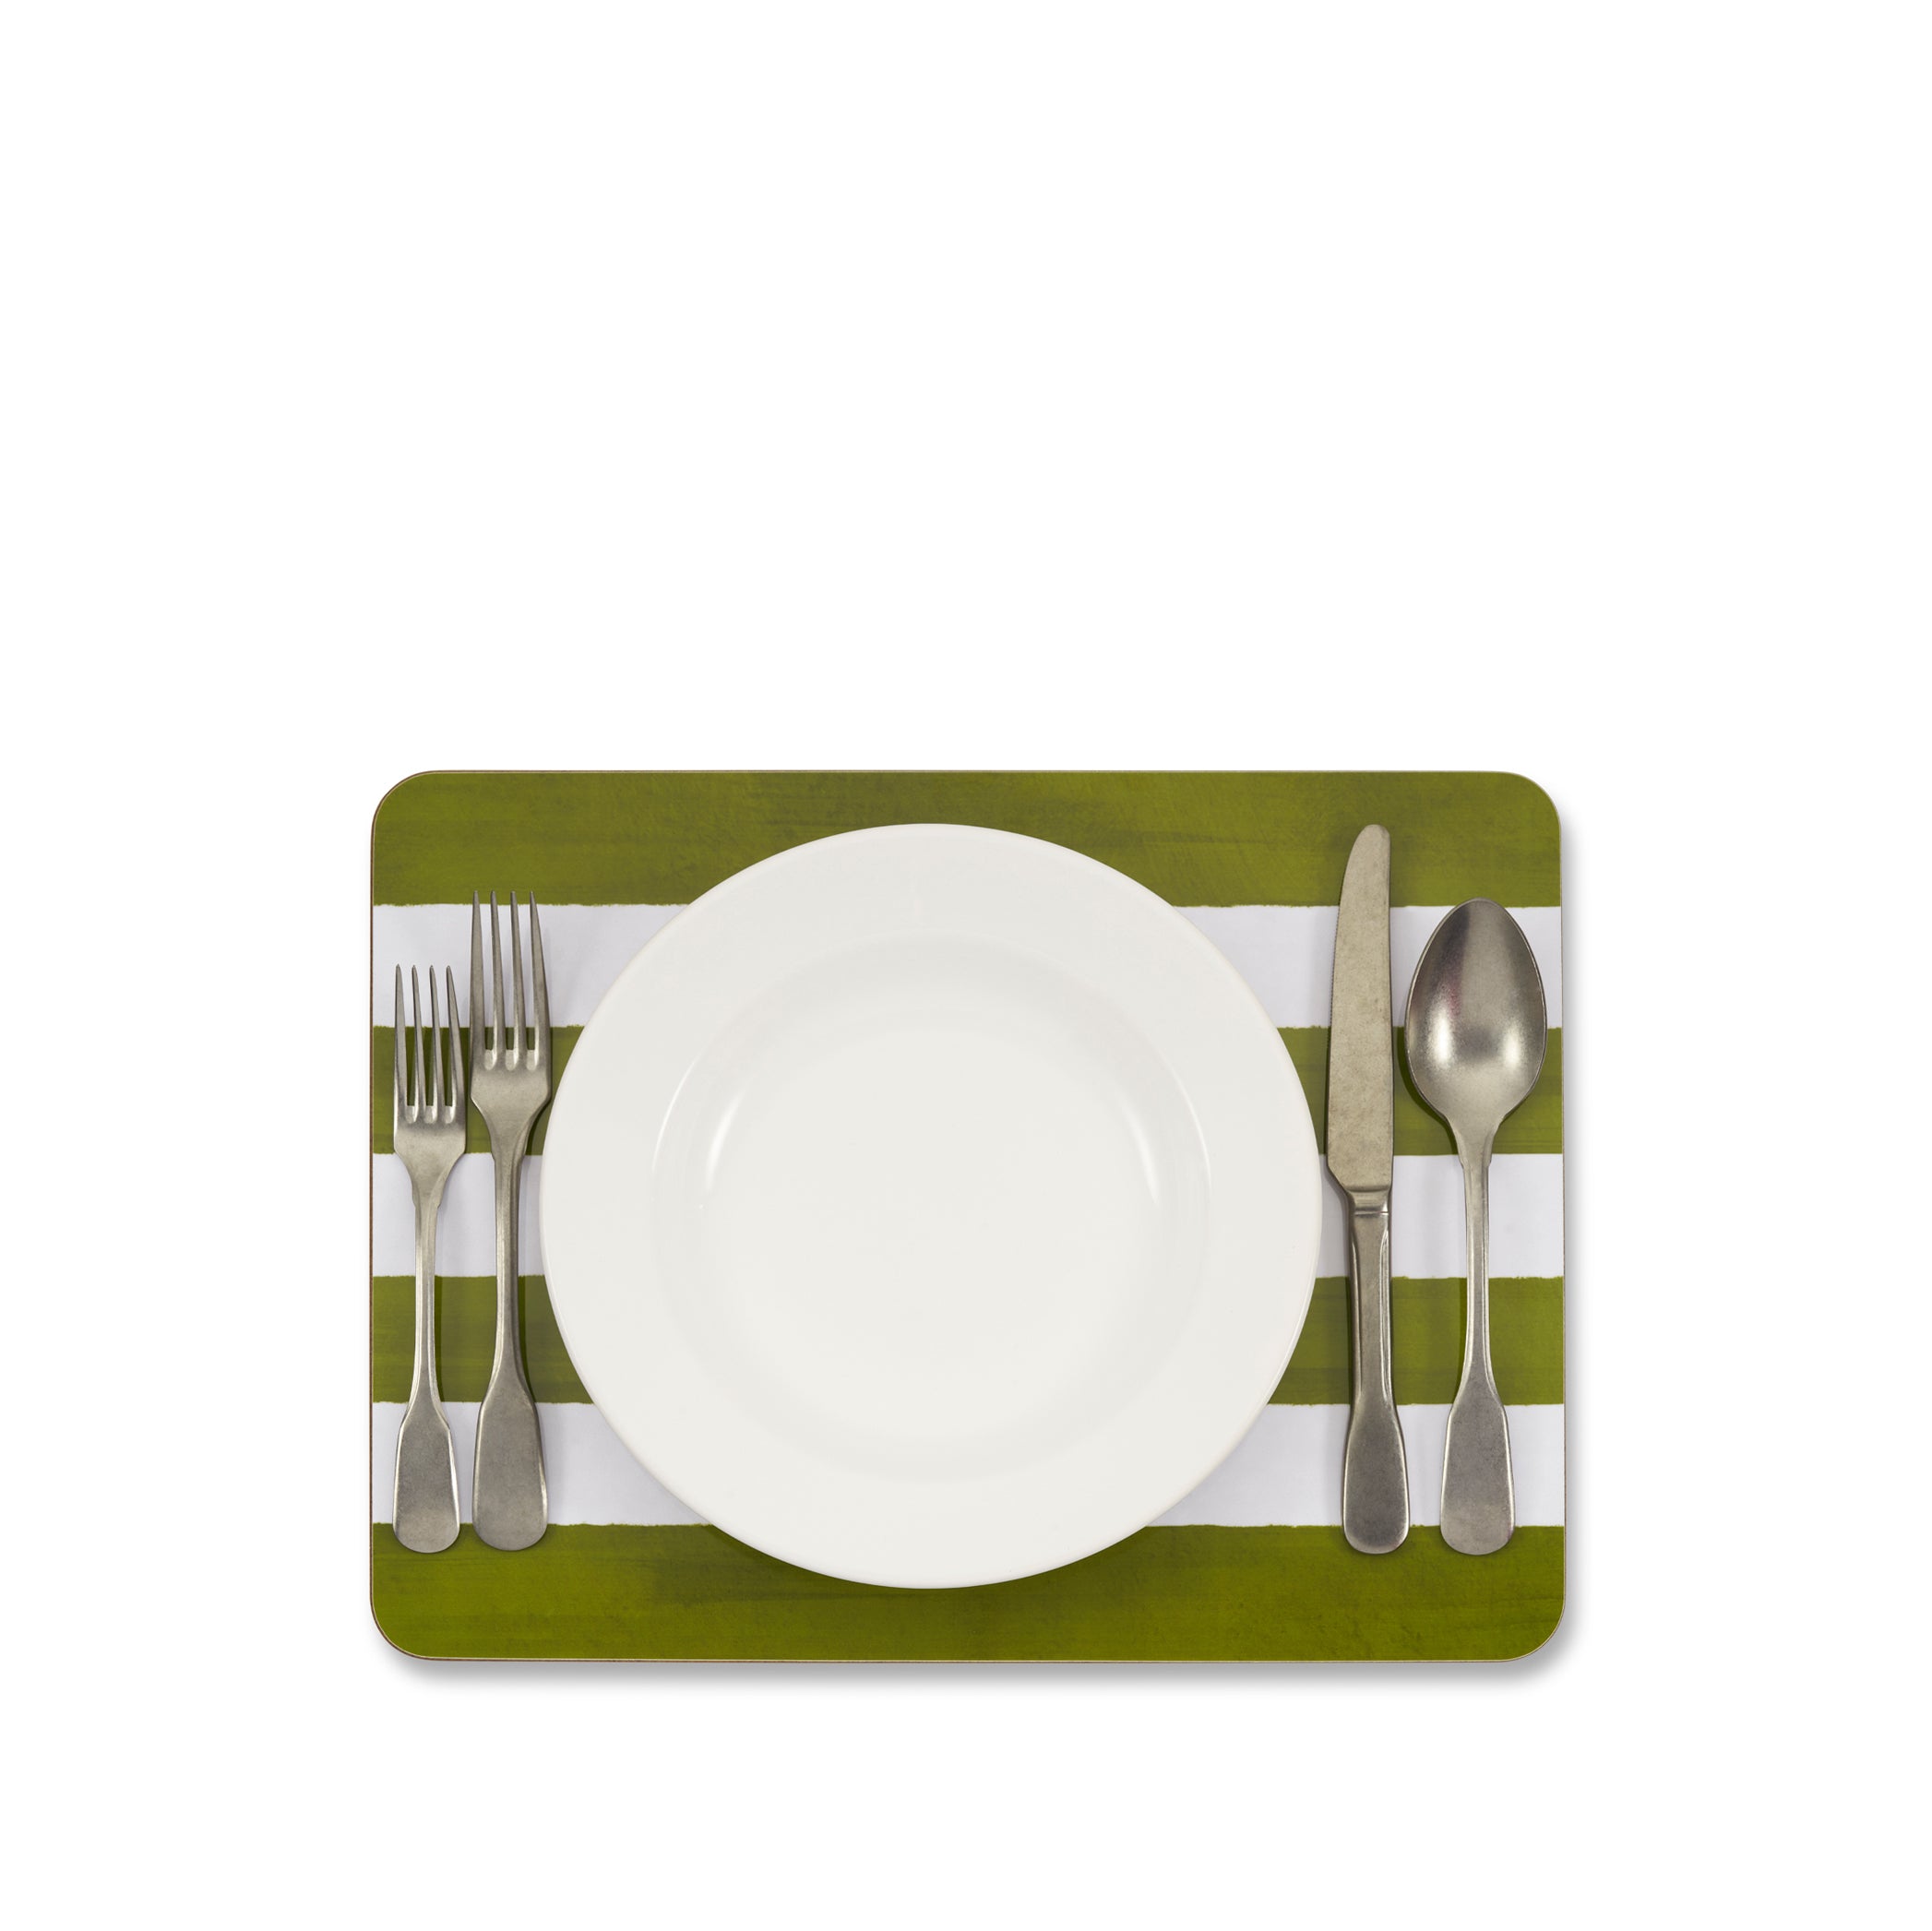 Stripe Cork-Backed Placemat in Avocado Green